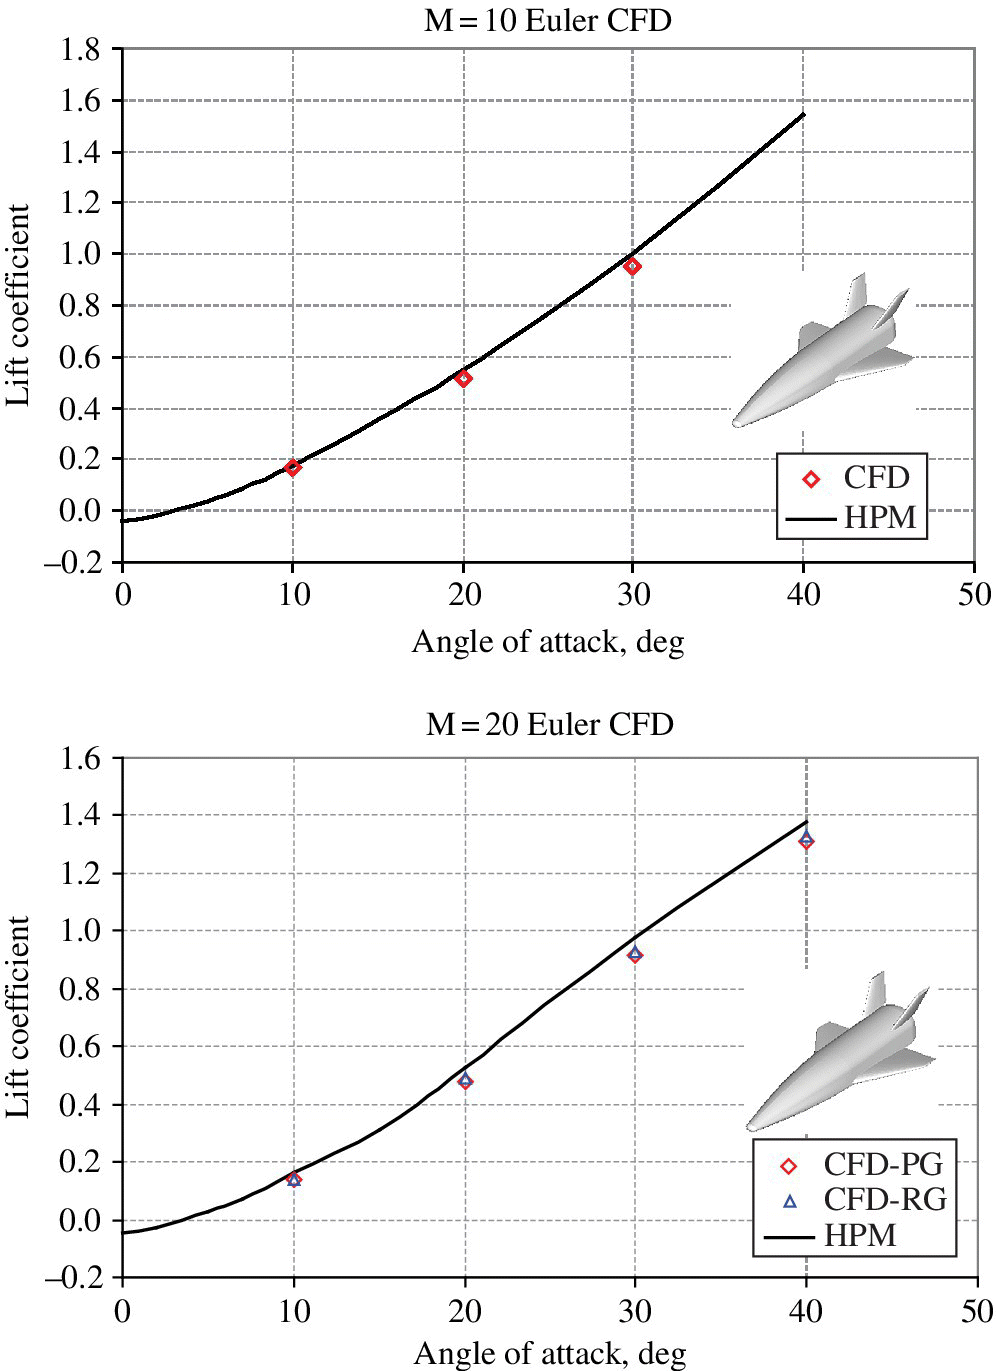 2 Graphs of lift coefficient versus angle of attack illustrating HPM (solid curve) and CFD (markers) results comparison at M = 10 Euler CFD (top) and M = 20 Euler CFD (bottom).